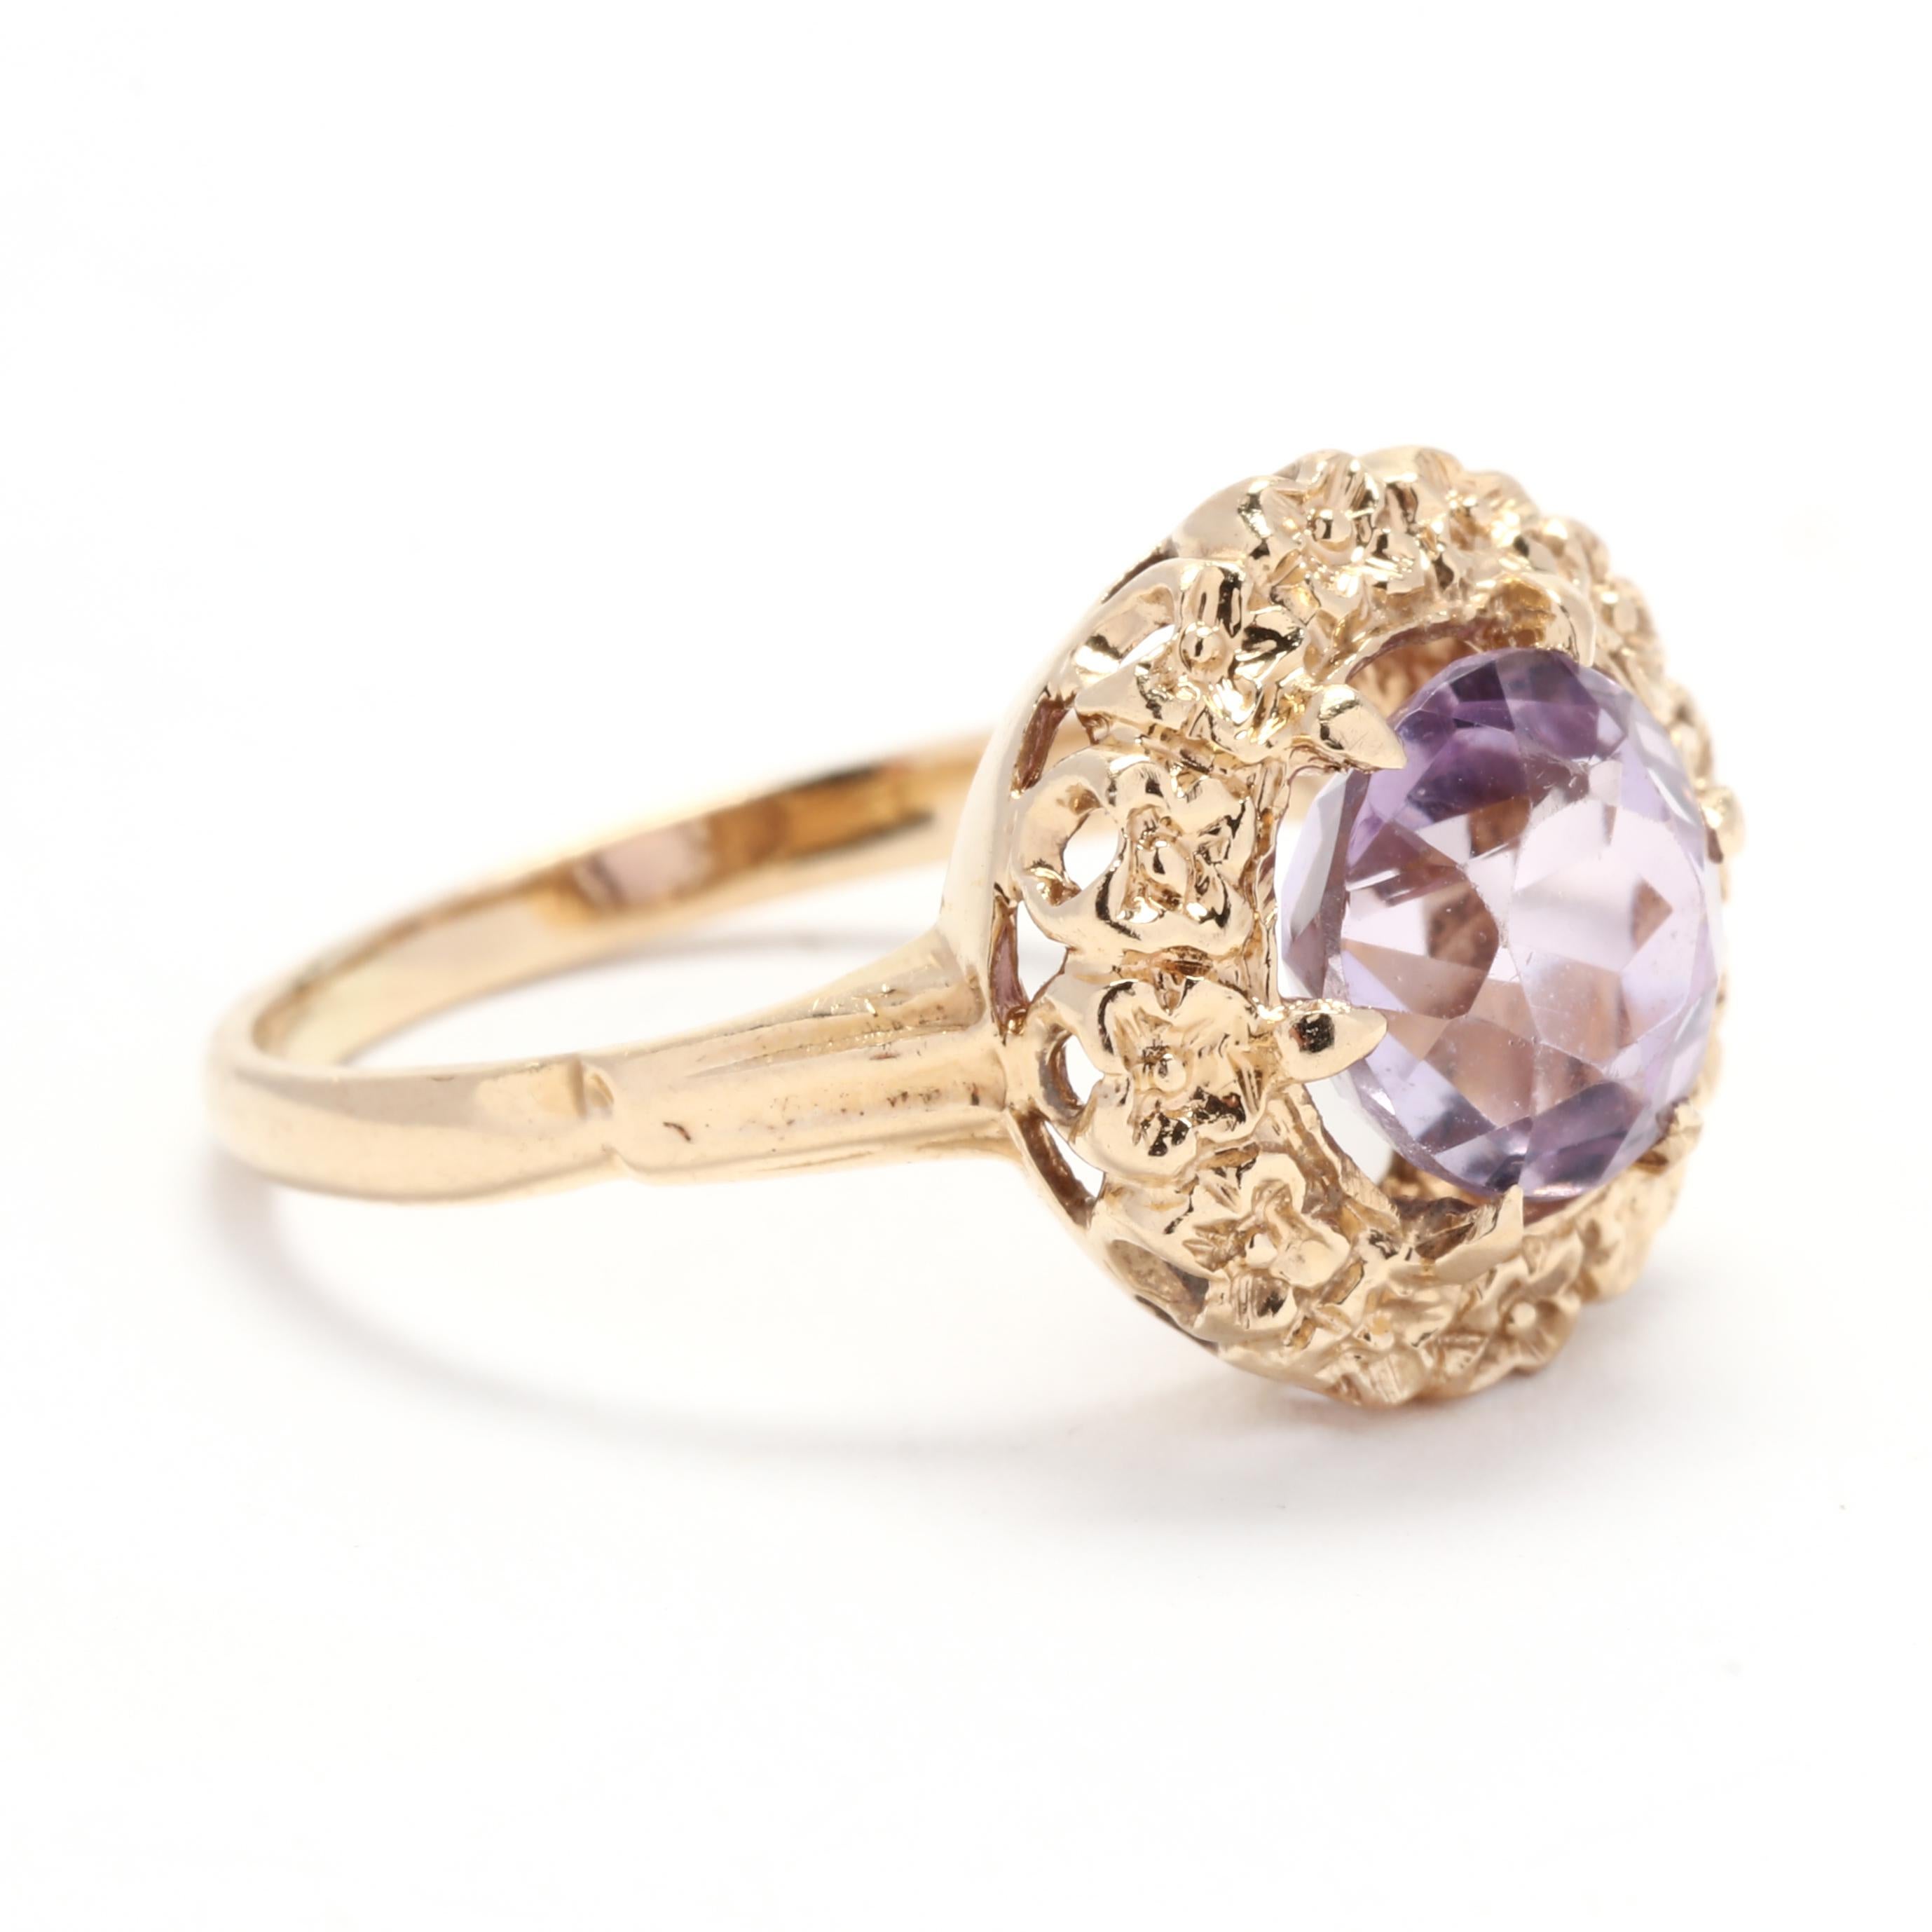 This vintage flower halo ring is a stunning and unique piece of jewelry that is sure to make a statement. Crafted in 14K yellow gold, this ring features a gorgeous 1.50ct oval amethyst gemstone as its centerpiece. With a ring size of 5.5, this piece